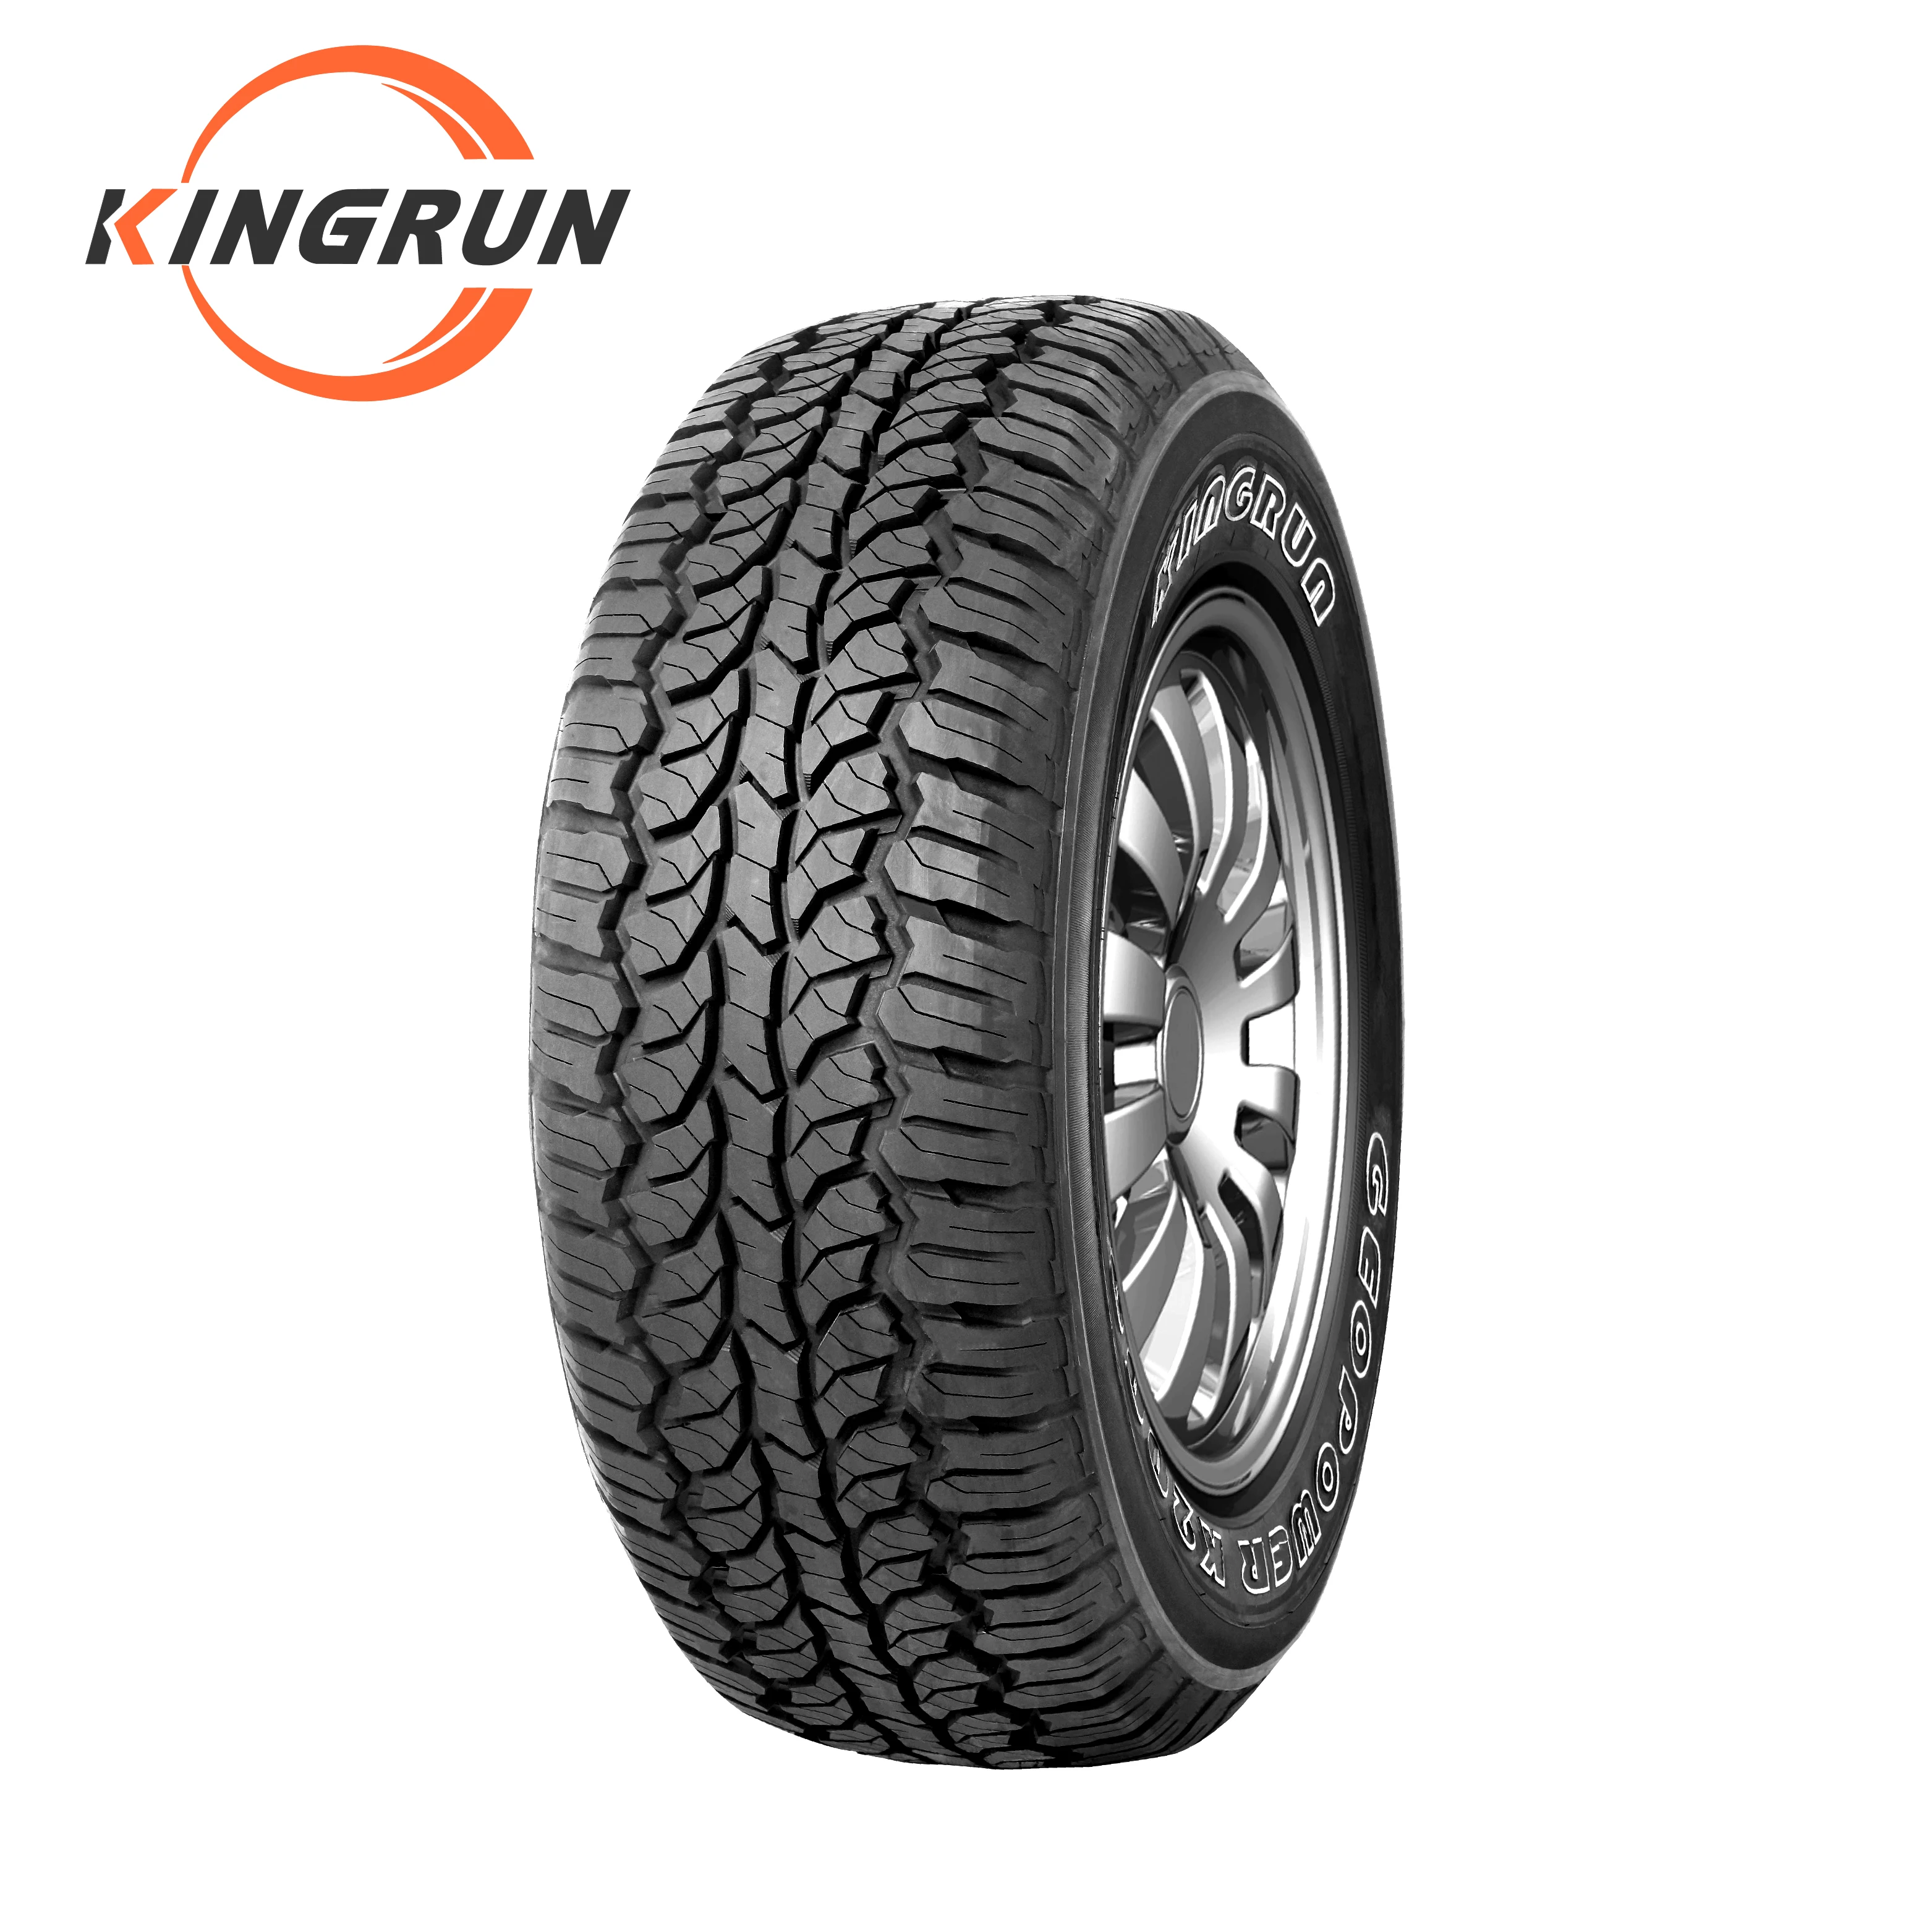 Tires and wheels, TRANSTONE Tire 175/70R13